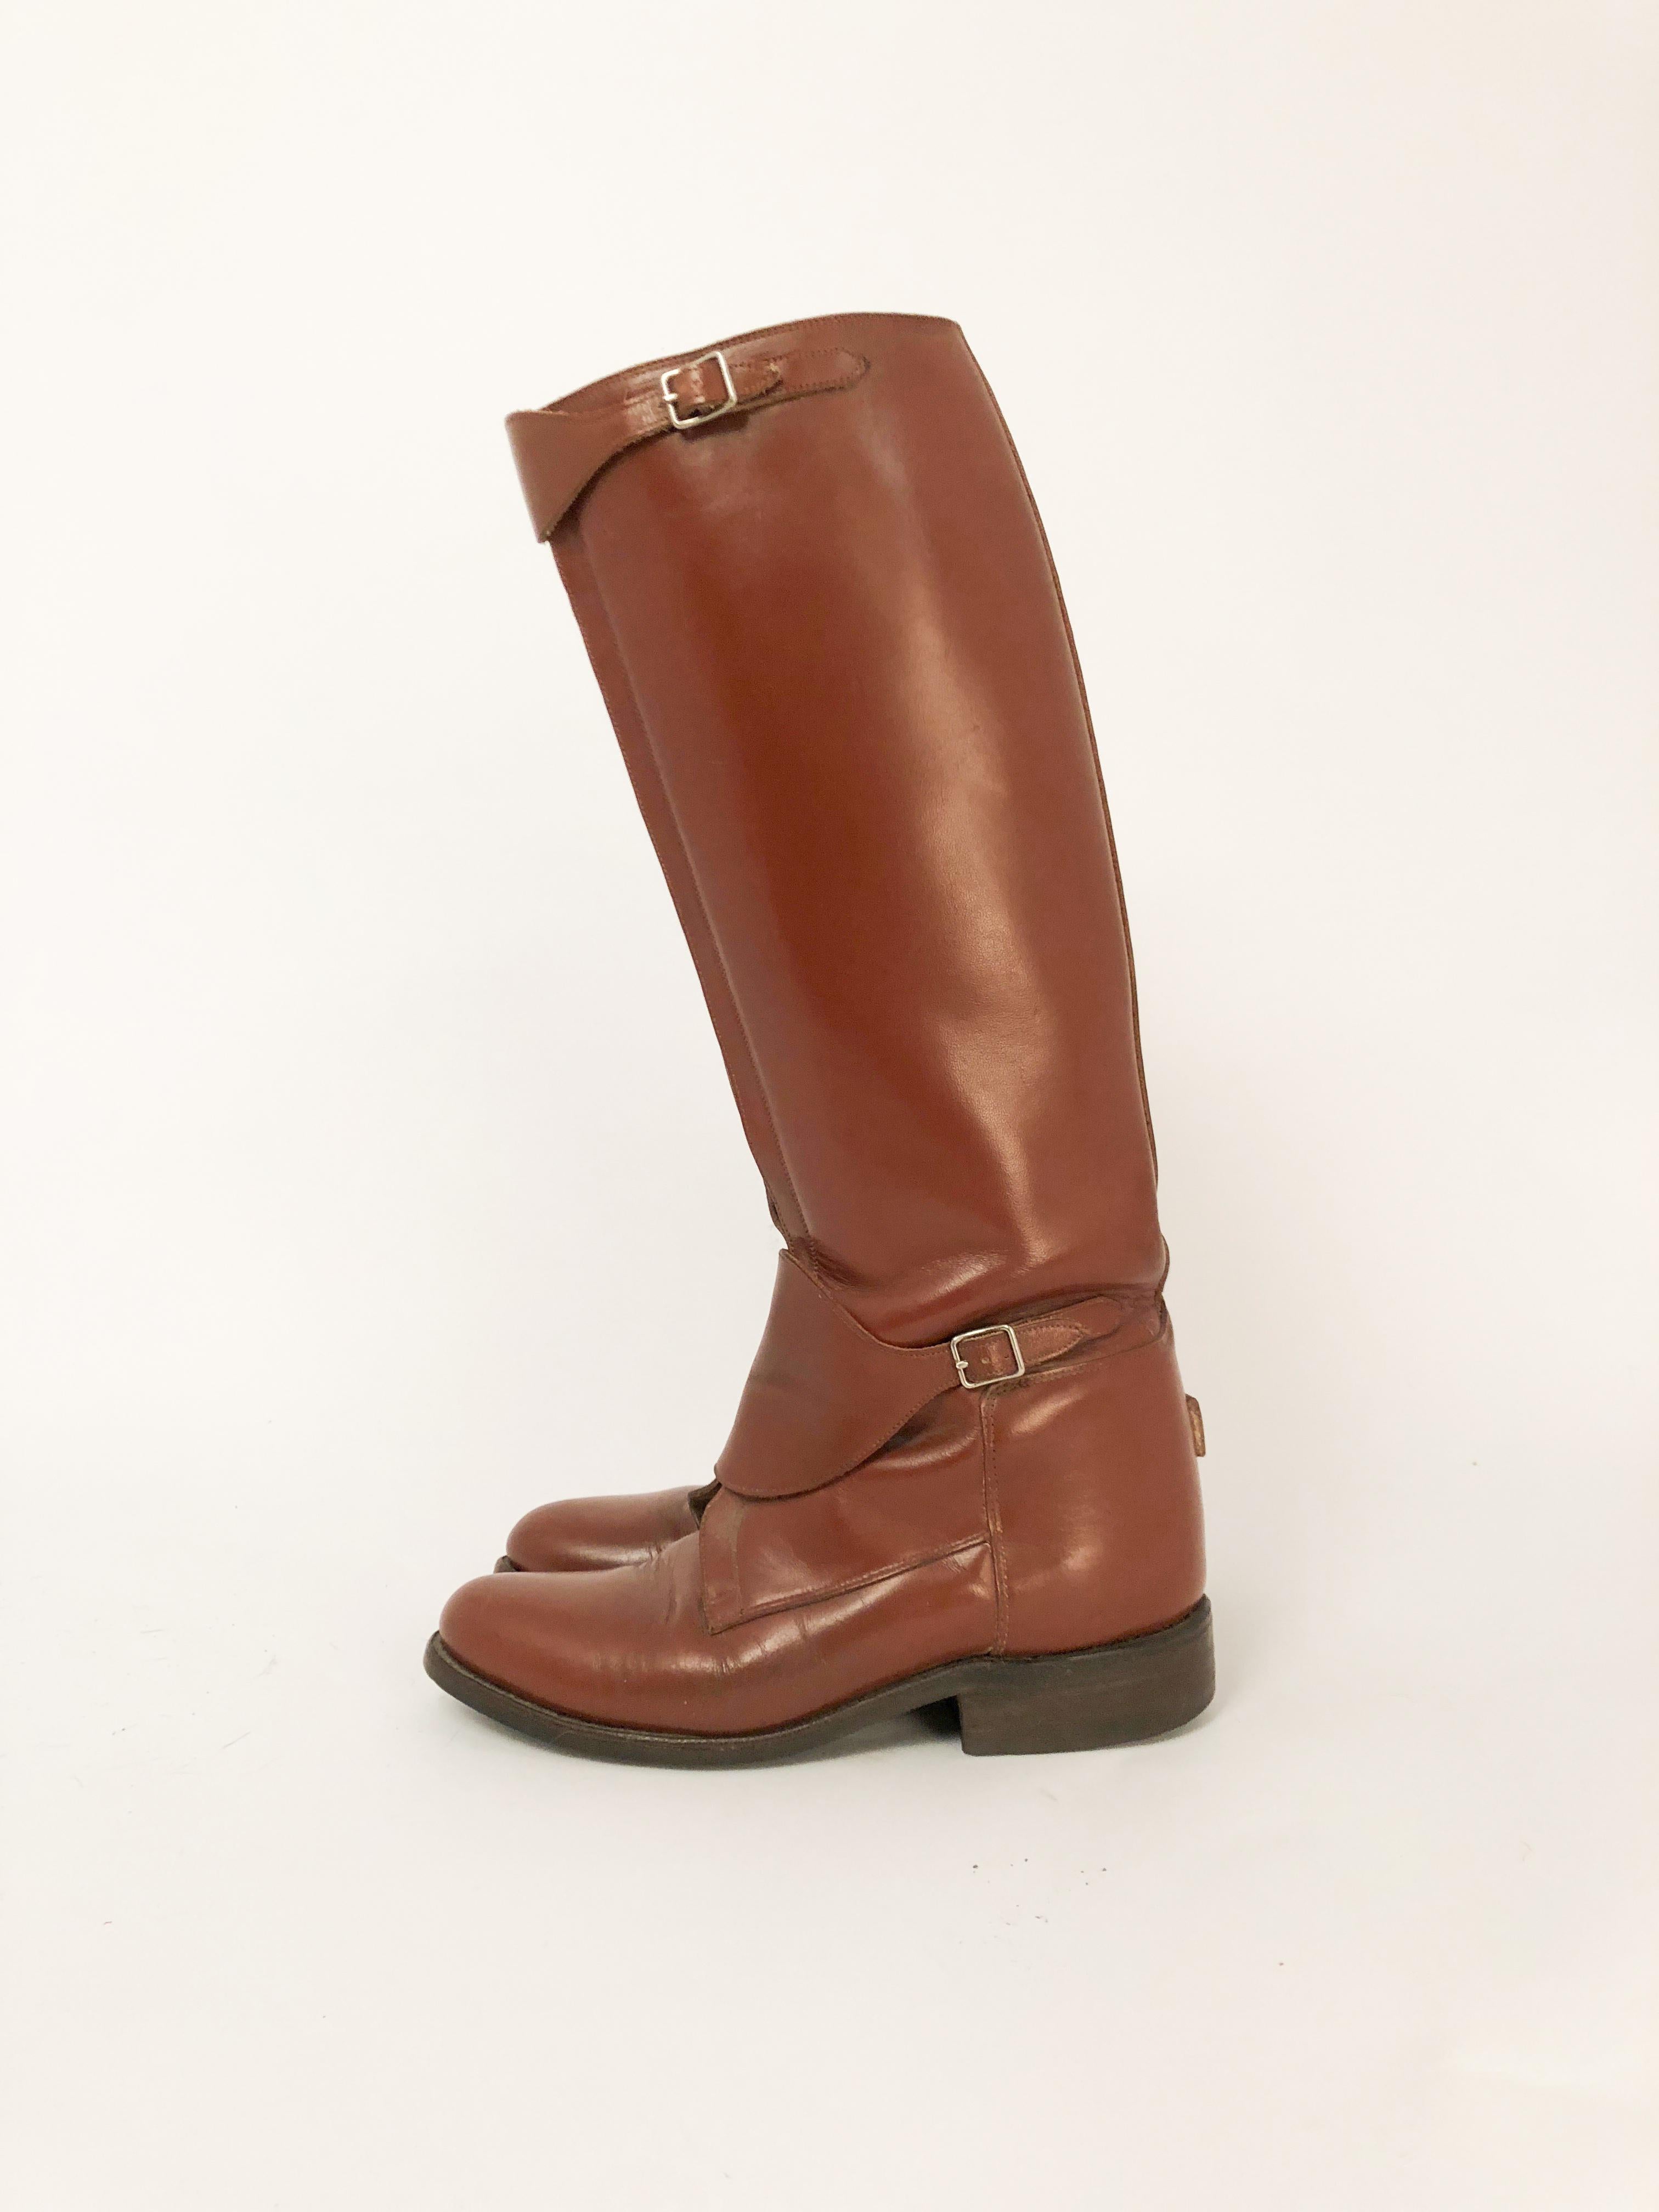 Cordovan colored leather riding boots with pig skin lining, front zipper, curved straps/bucklings on the top and bottoms of the zipper to lock the boots in place. Spur stop on the heel.